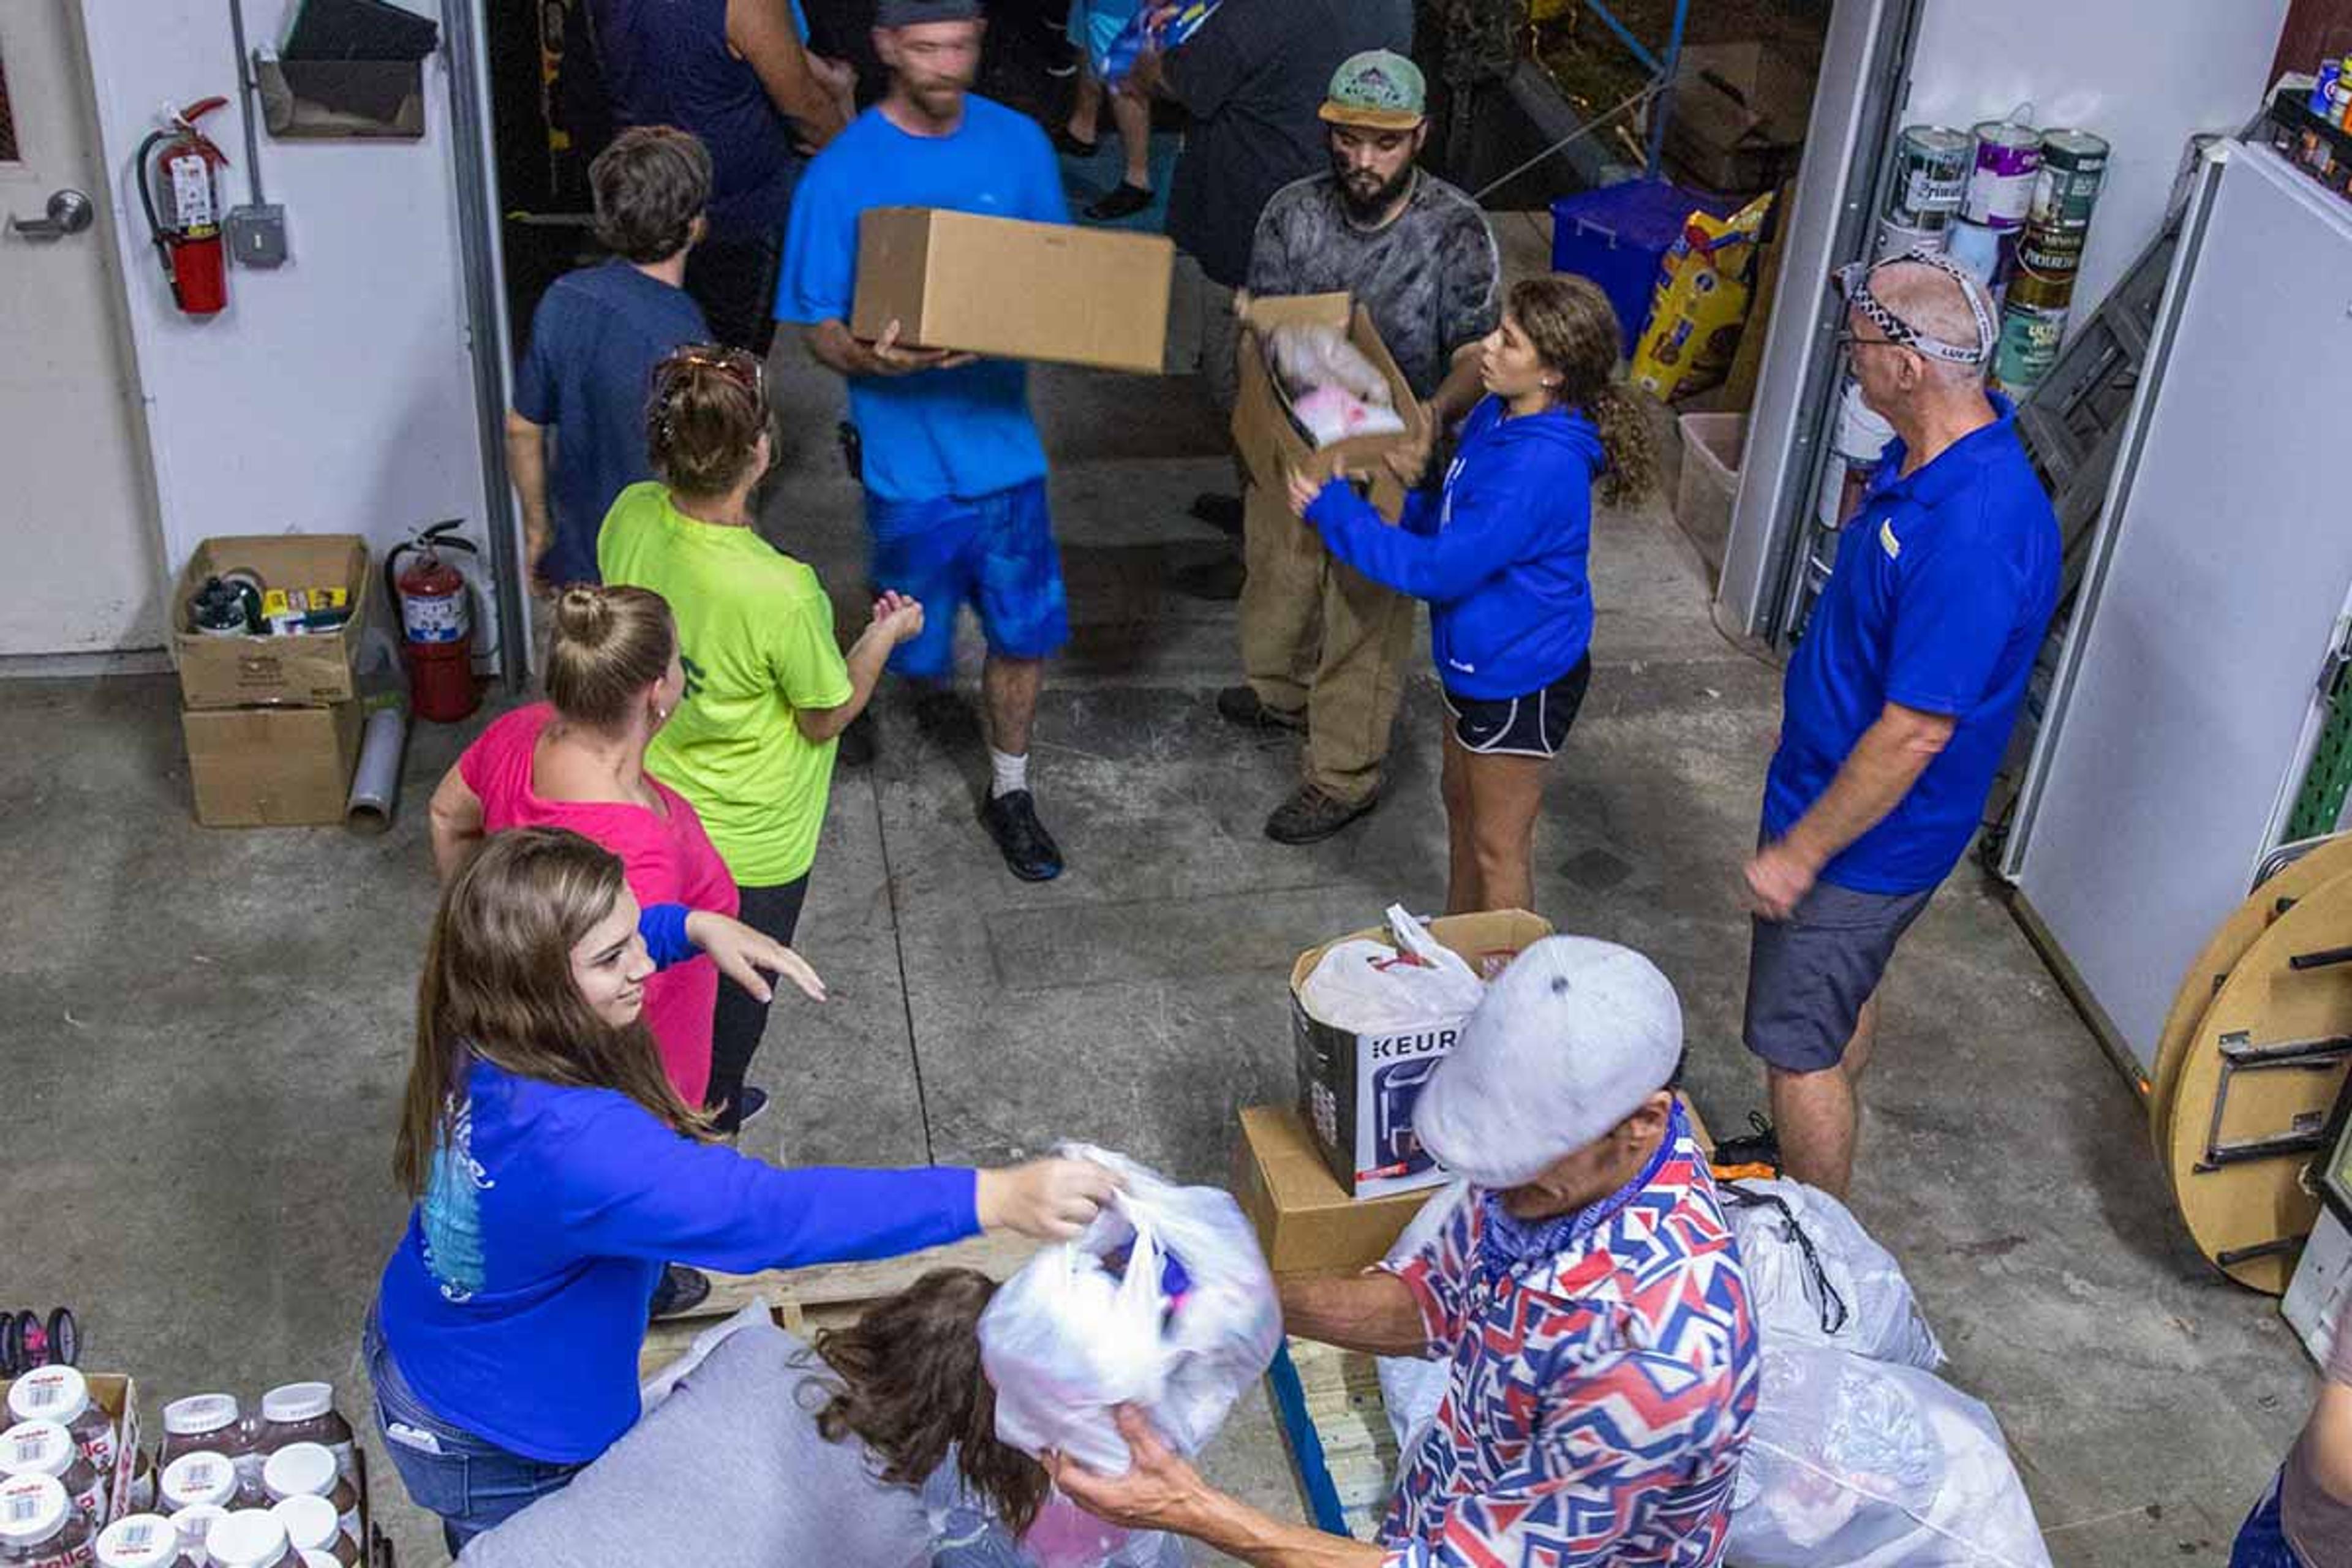 High-angle view looking down on a group of disaster relief workers unloading a truck full of food and supplies into a warehouse.